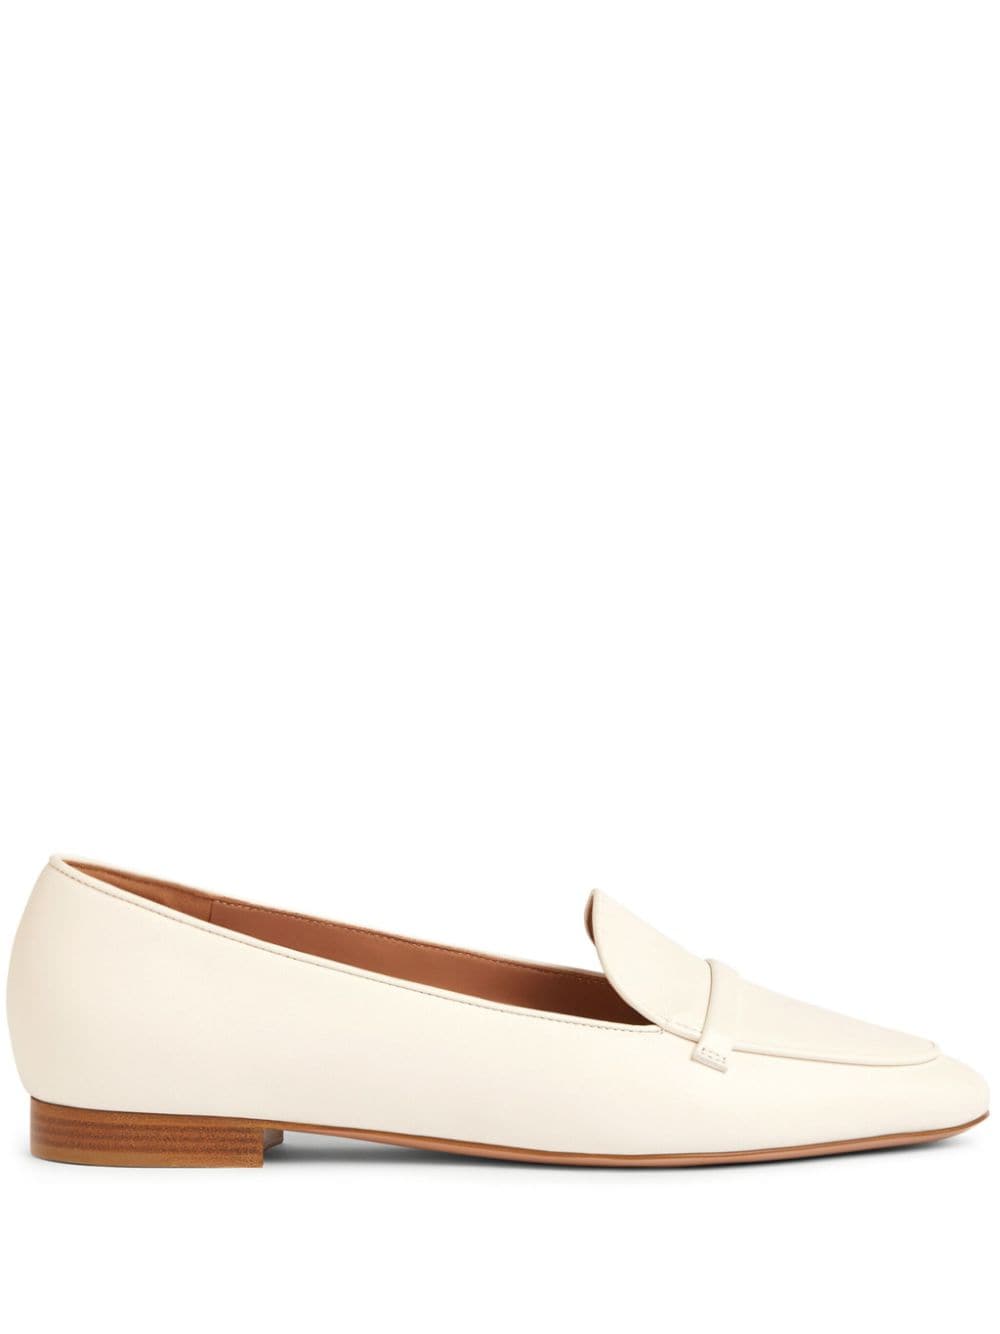 Malone Souliers Bruni leather loafers - Neutrals von Malone Souliers